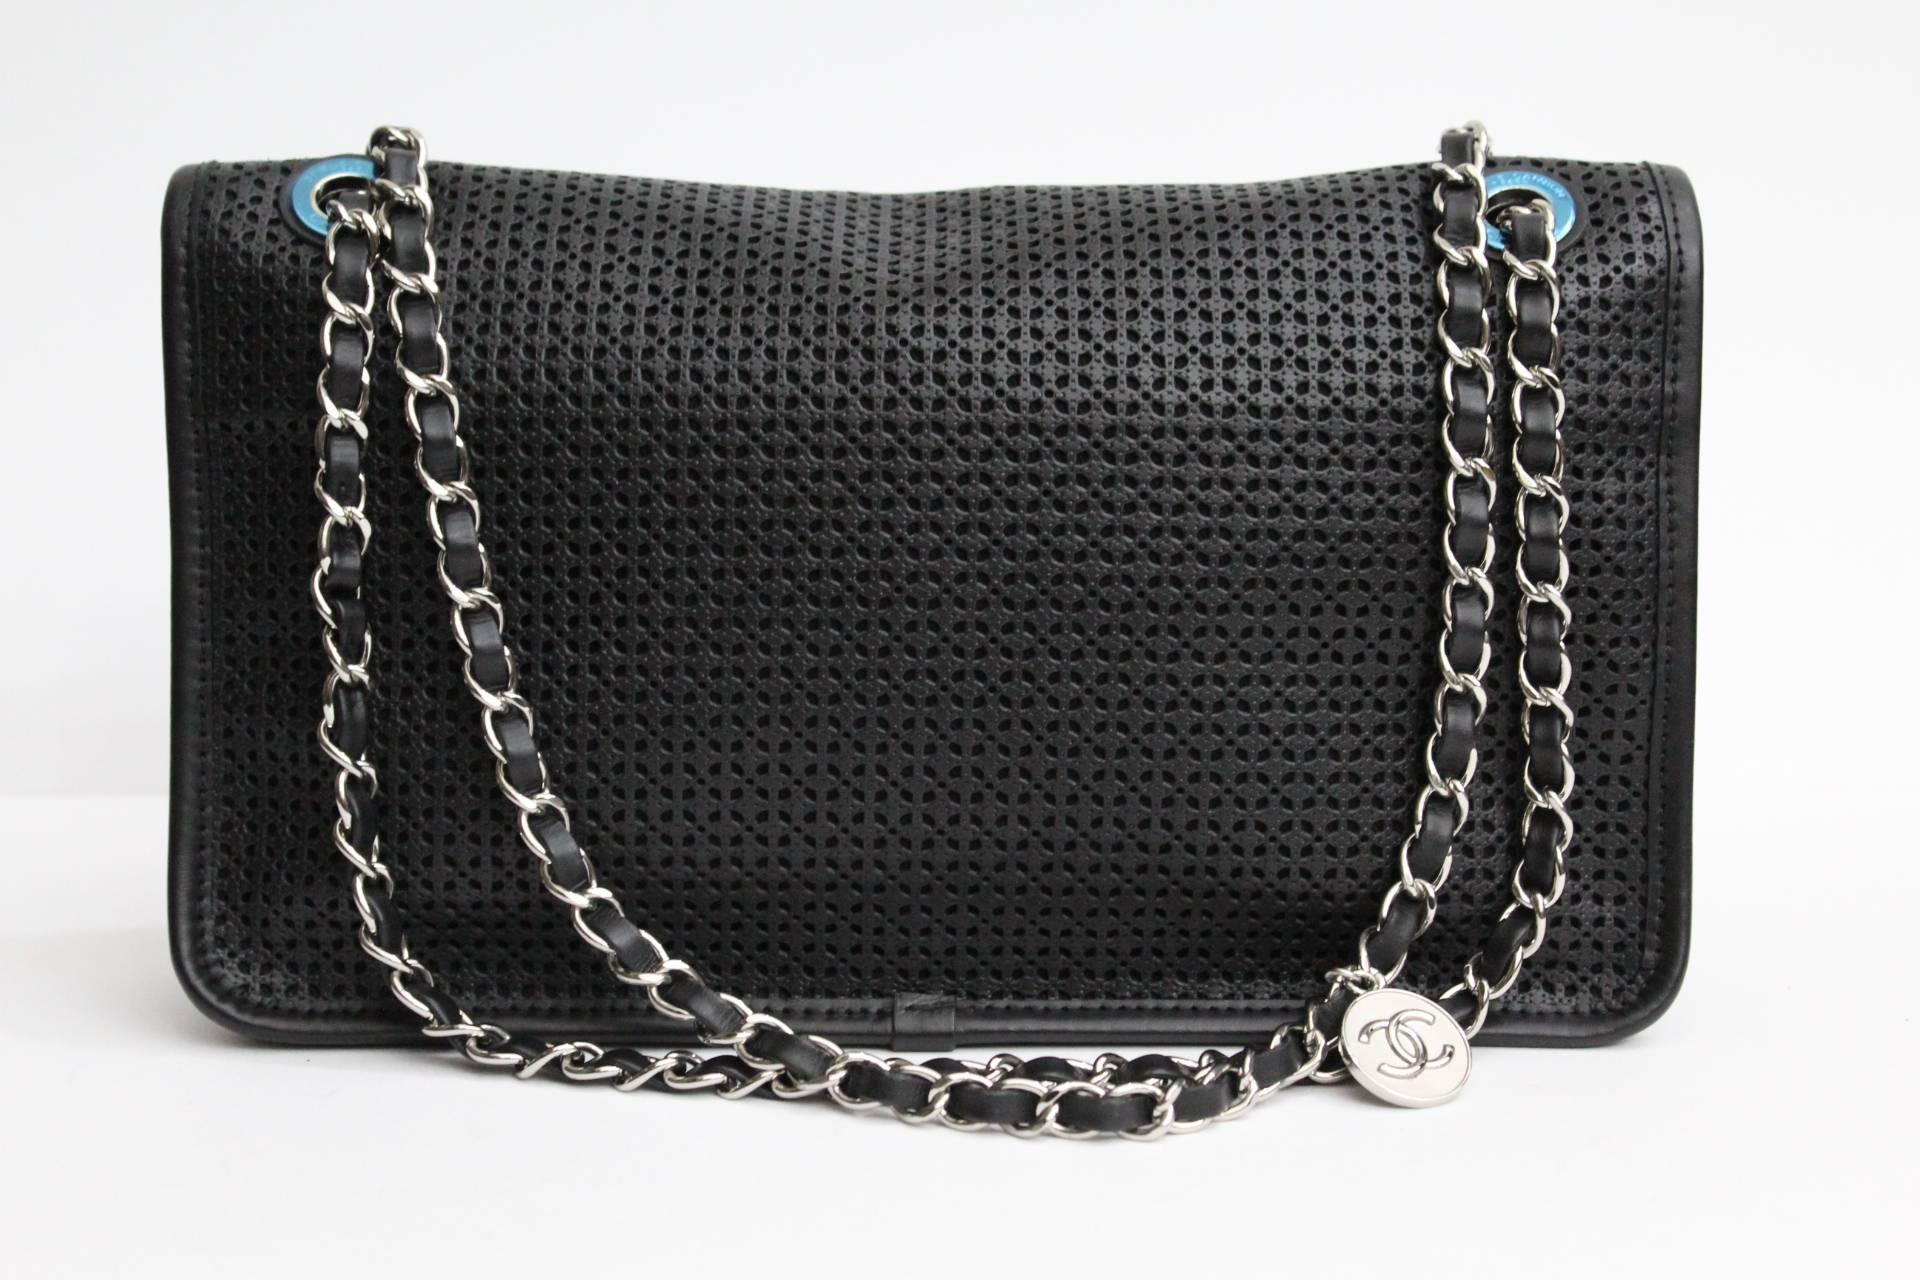 Black CHANEL Blu Navy Perforated Leather Up in the Air Flap Bag Cruise 2015